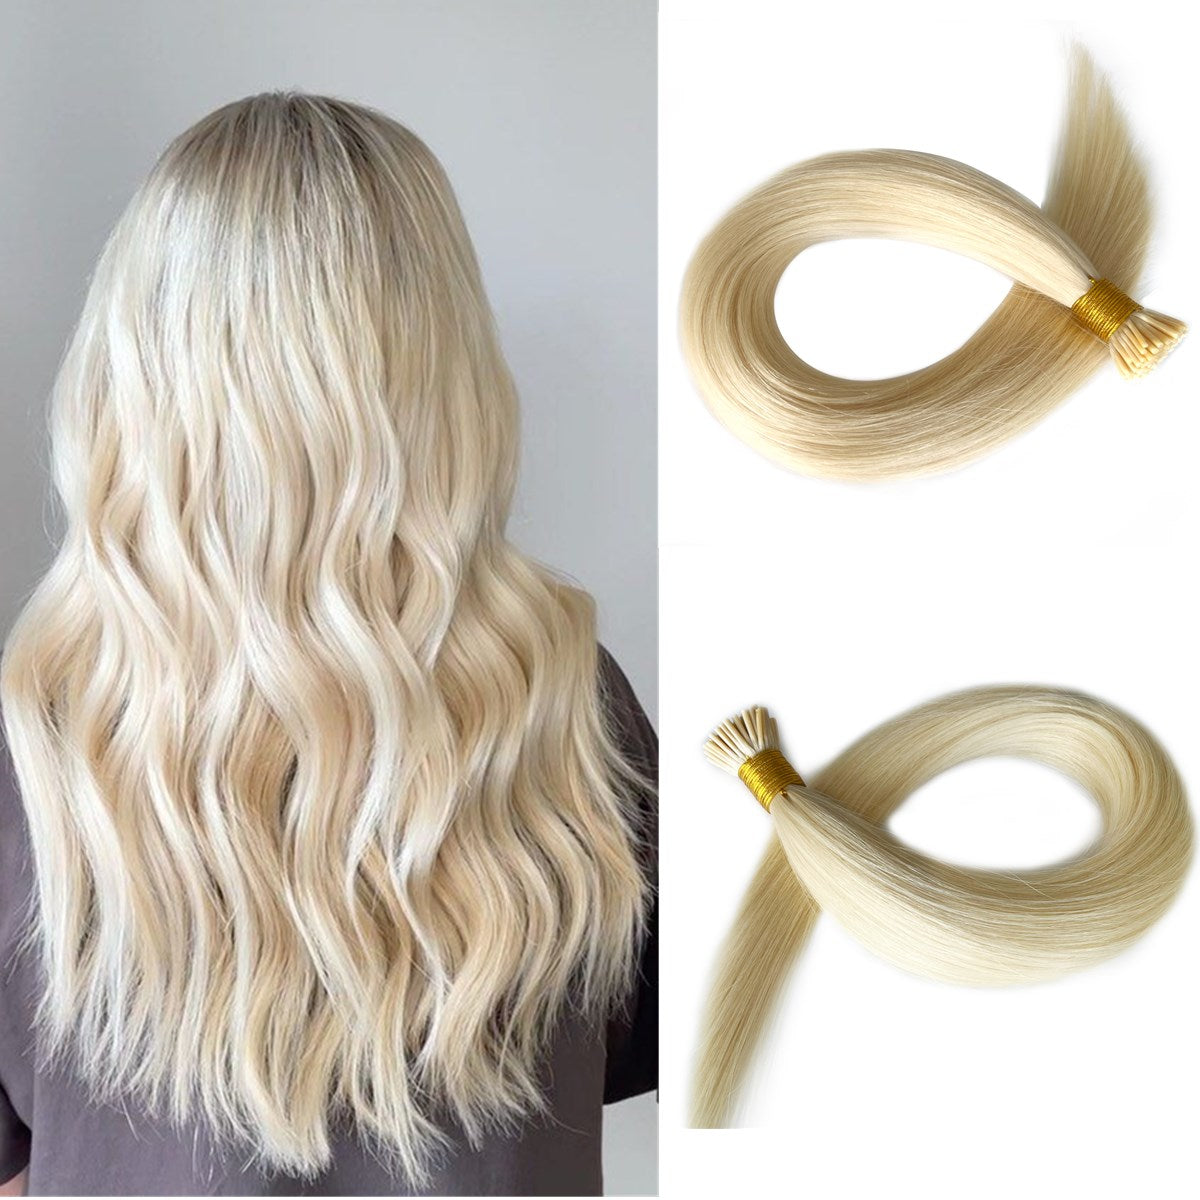 I Tip Hair Extensions Professional Keratin Hair Extension Blonde #60 | Hairperfecto